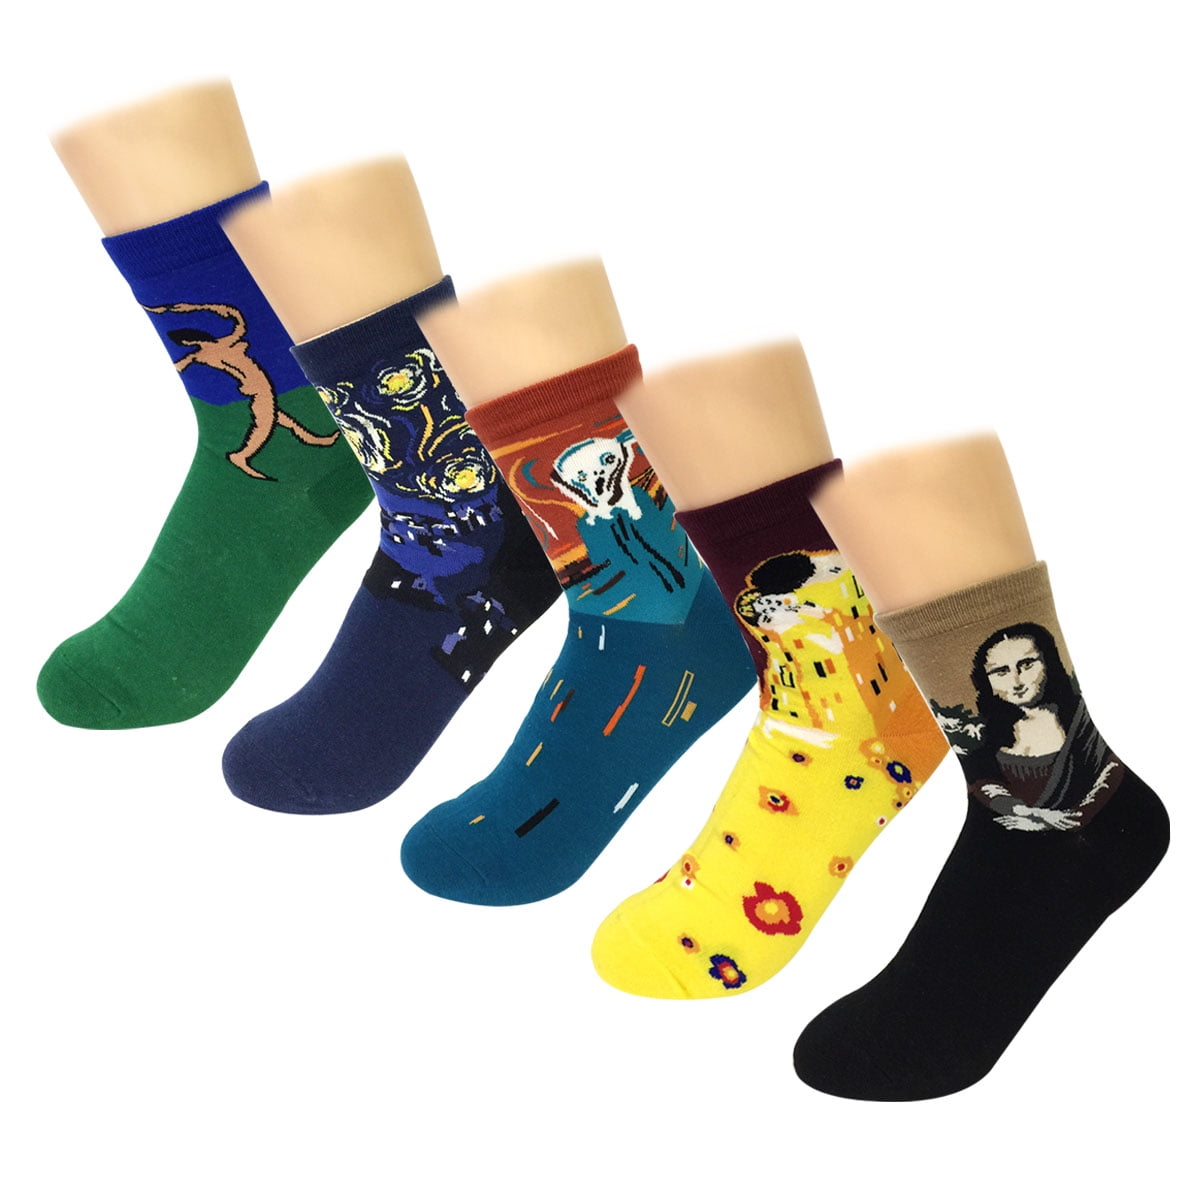 Abstract Cat Art Painting Casual Cotton Crew Socks Cute Funny Sock,great For Sports And Hiking